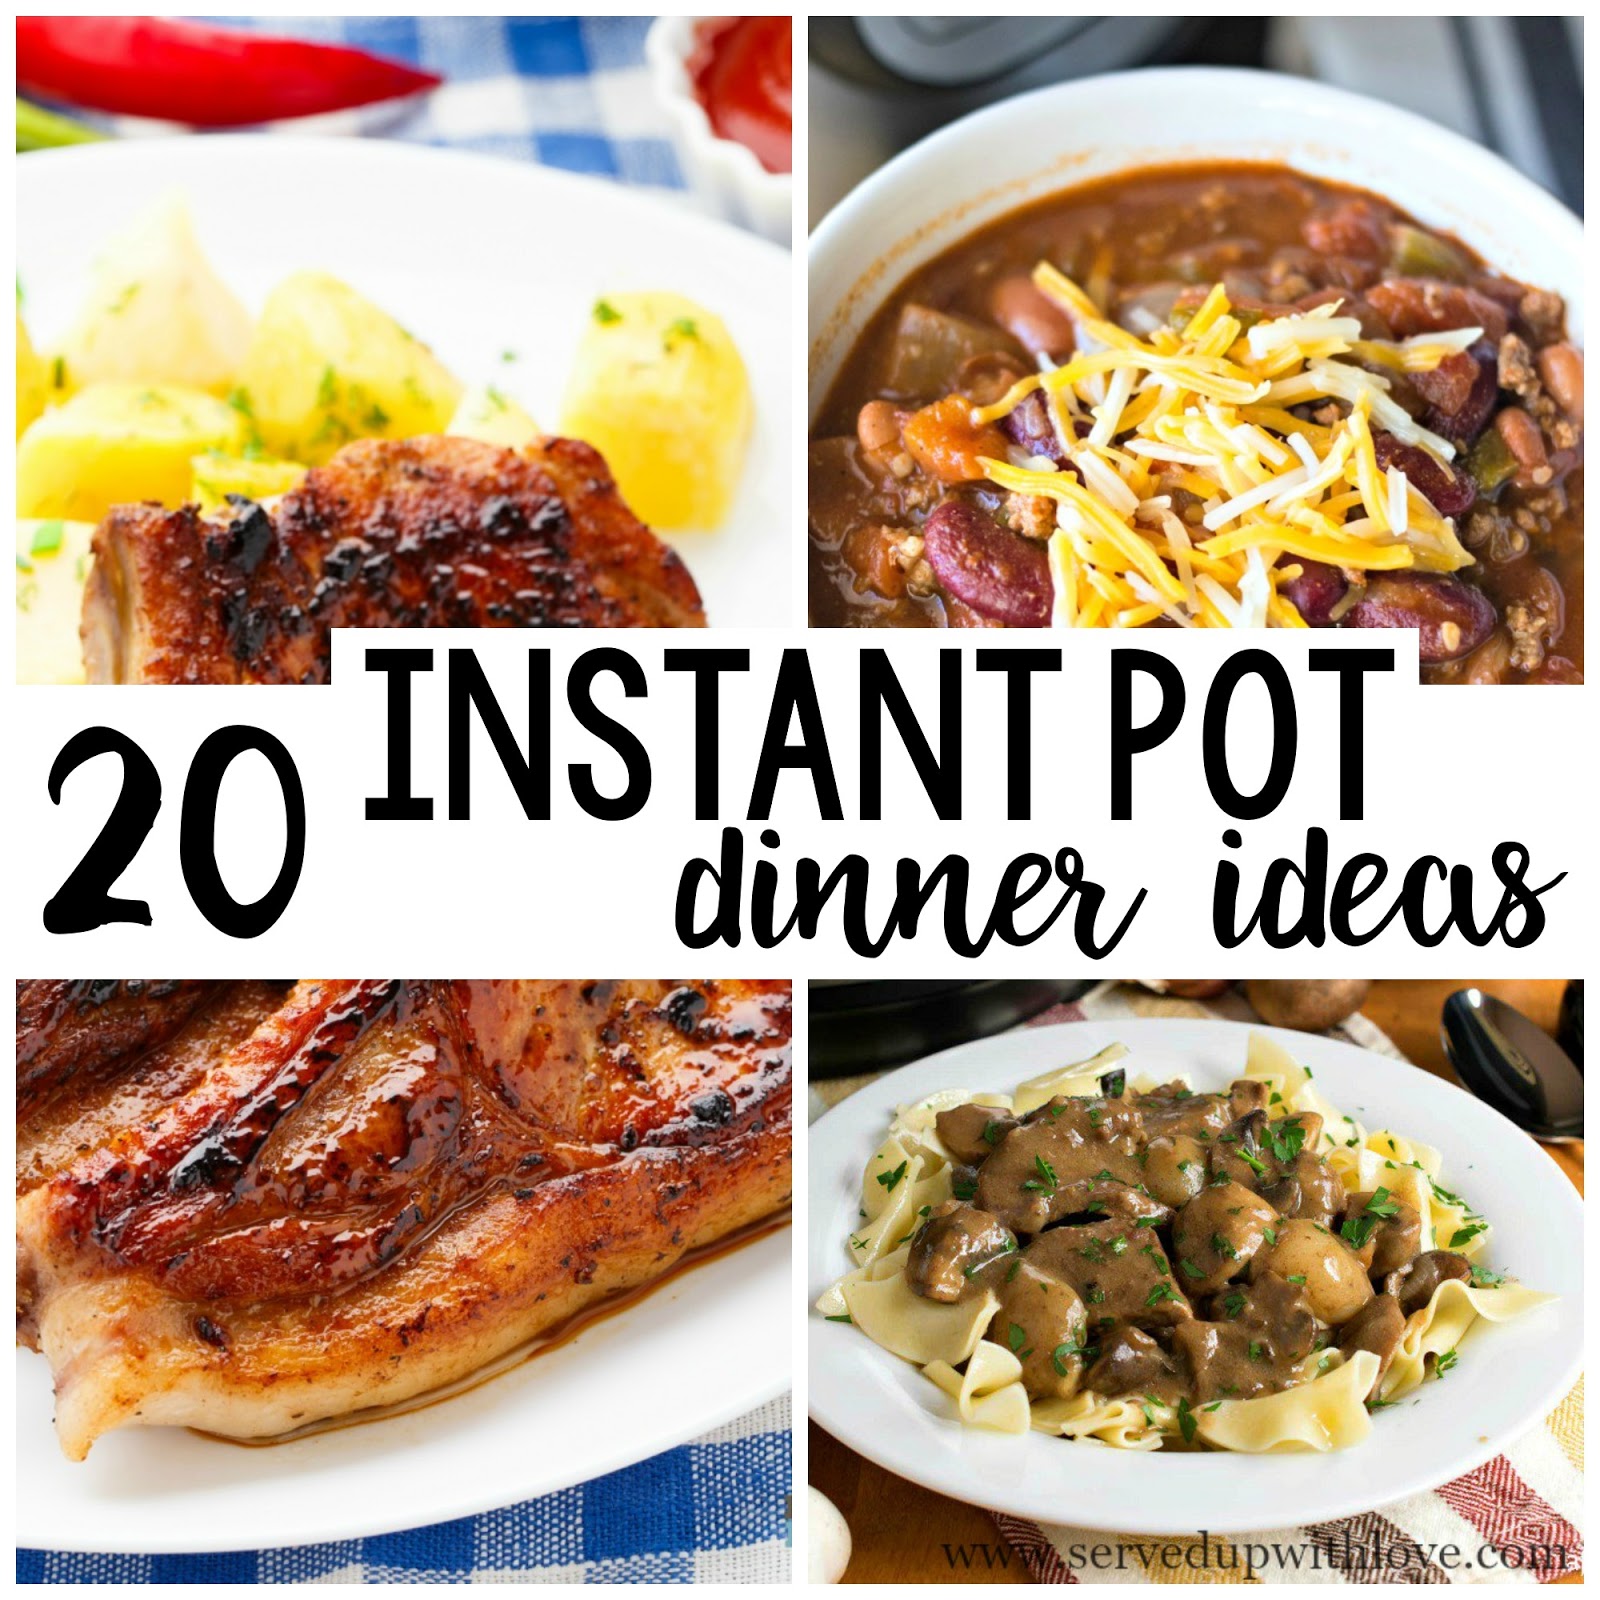 Served Up With Love: 20 Instant Pot Dinner Ideas